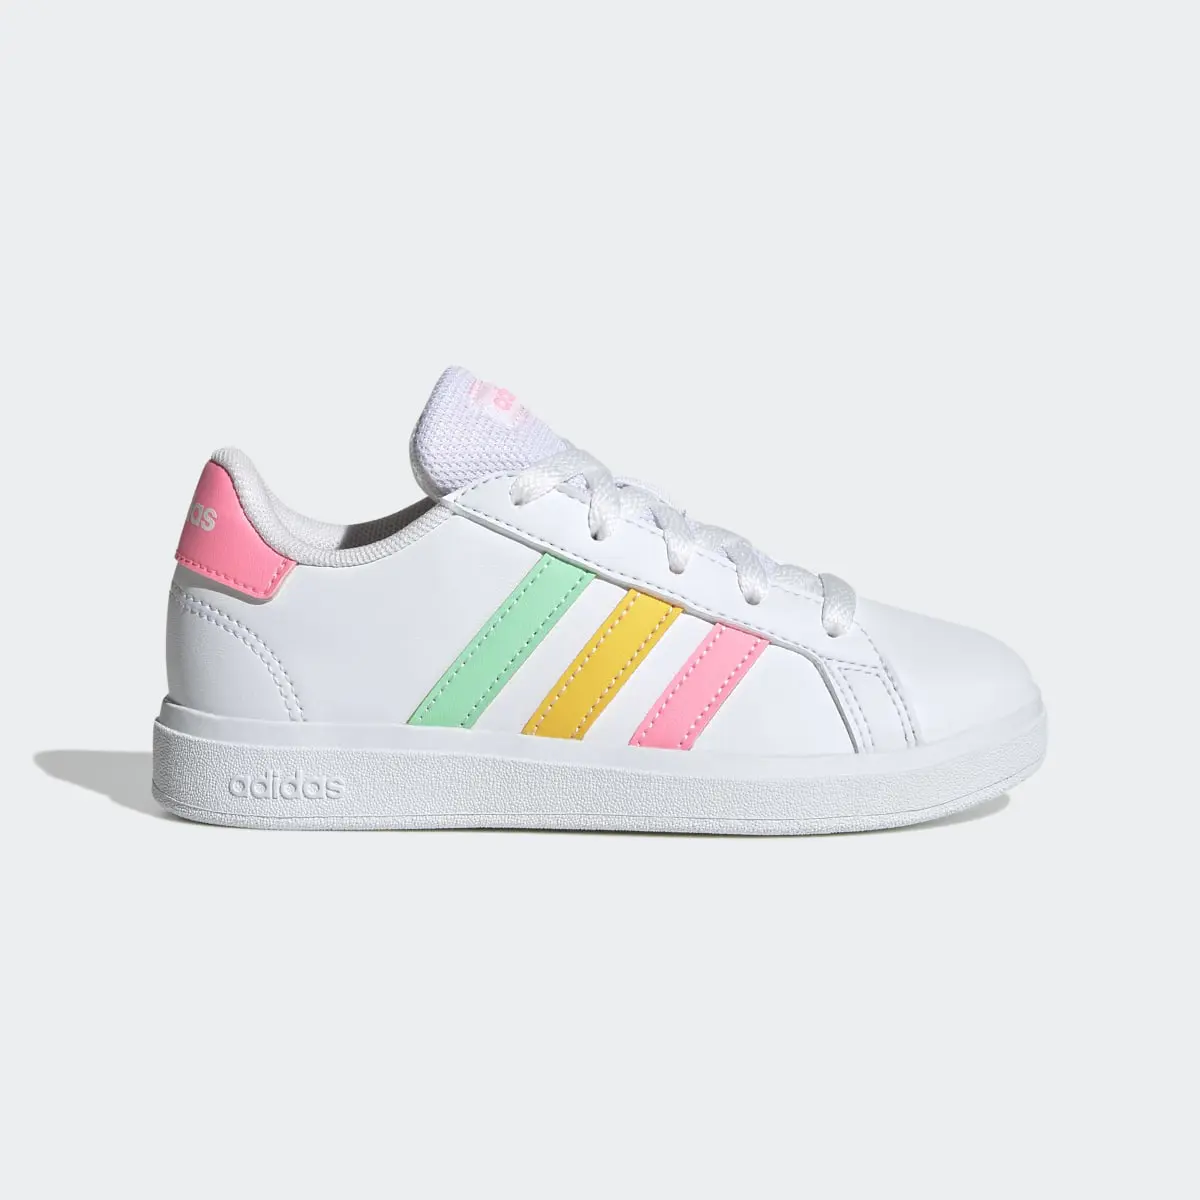 Adidas Grand Court Lifestyle Tennis Lace-Up Schuh. 2